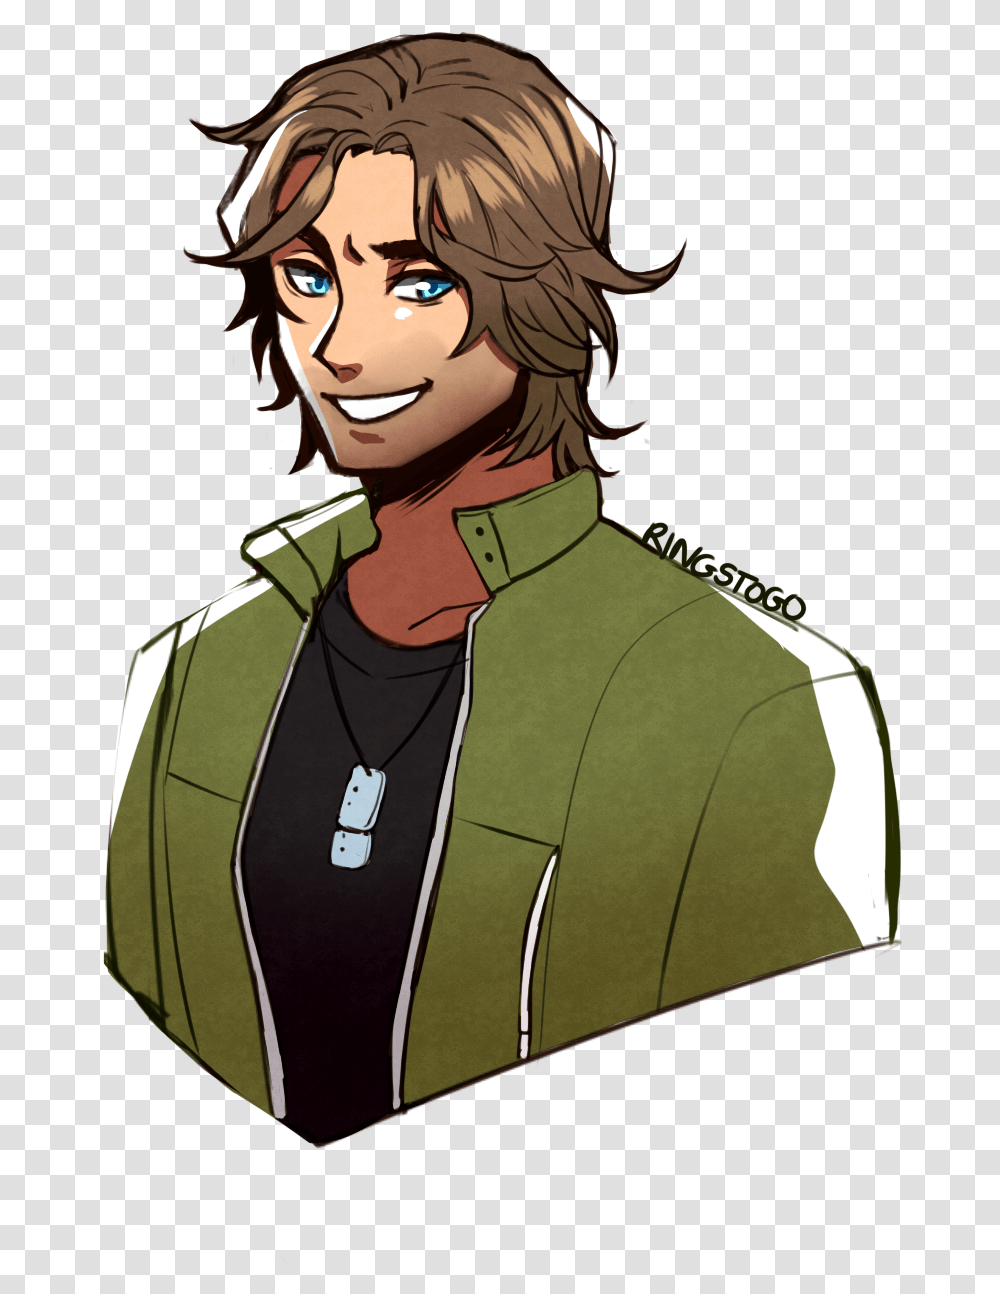 Jake By Ringstogo On Tumblr Choices Game End Of Summer Choices Jake Fanart, Person, Human, Apparel Transparent Png